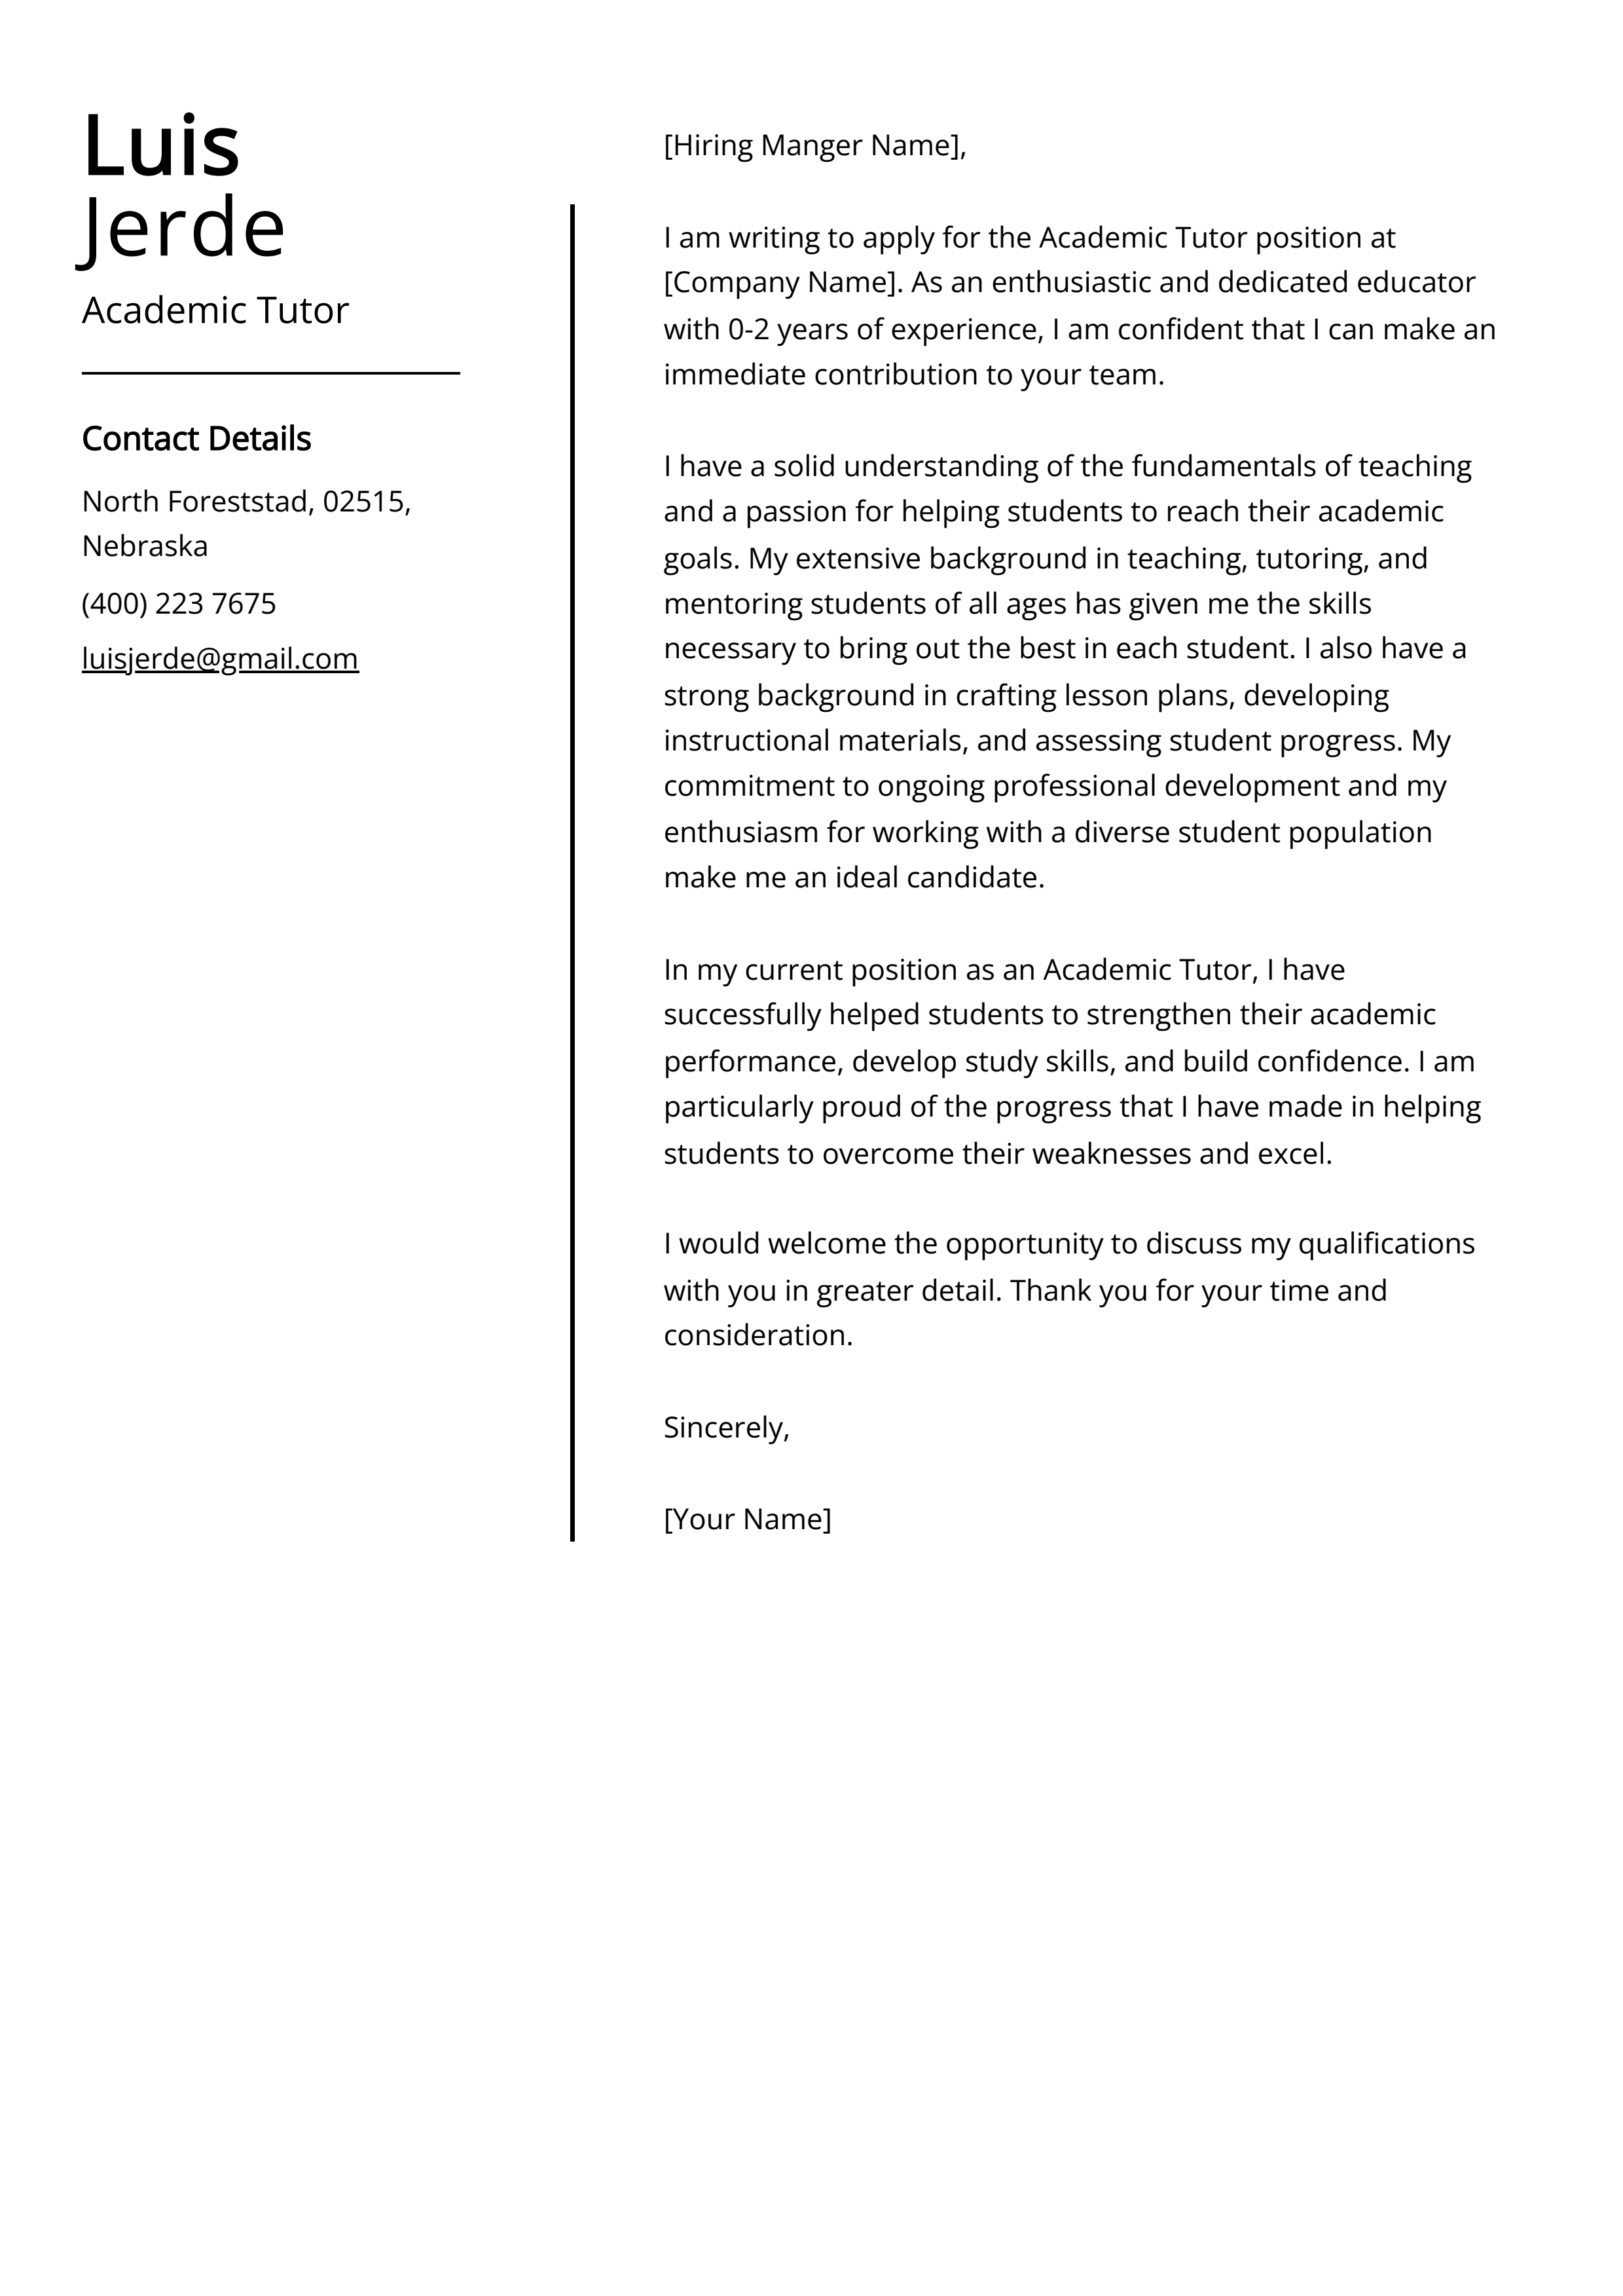 Academic Tutor Cover Letter Example